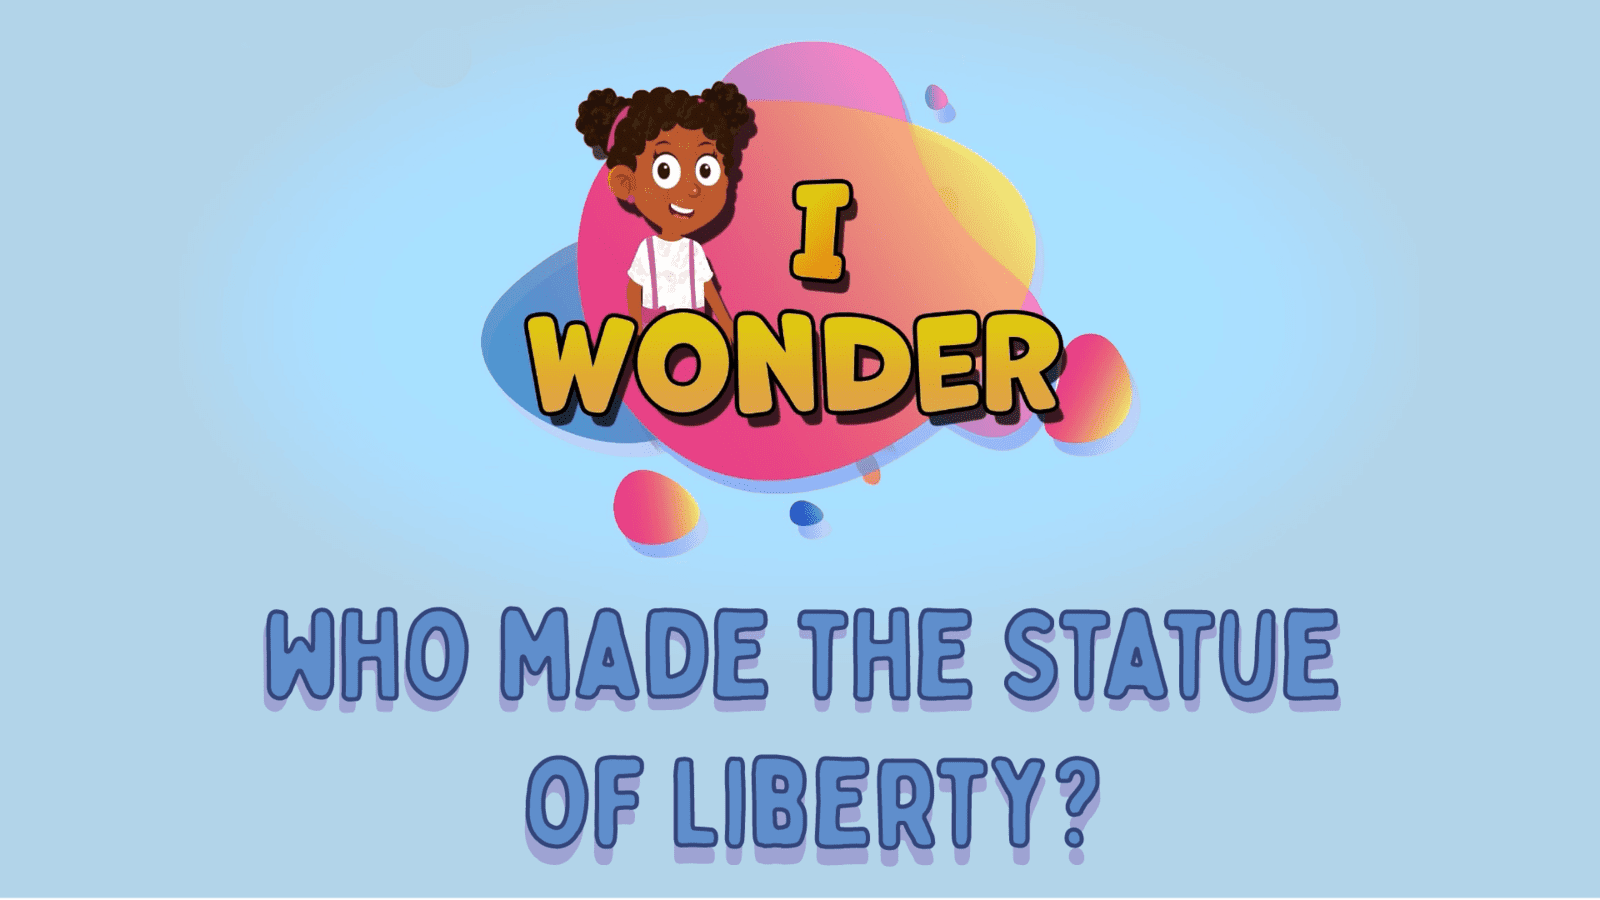 Who Made The Statue Of Liberty?